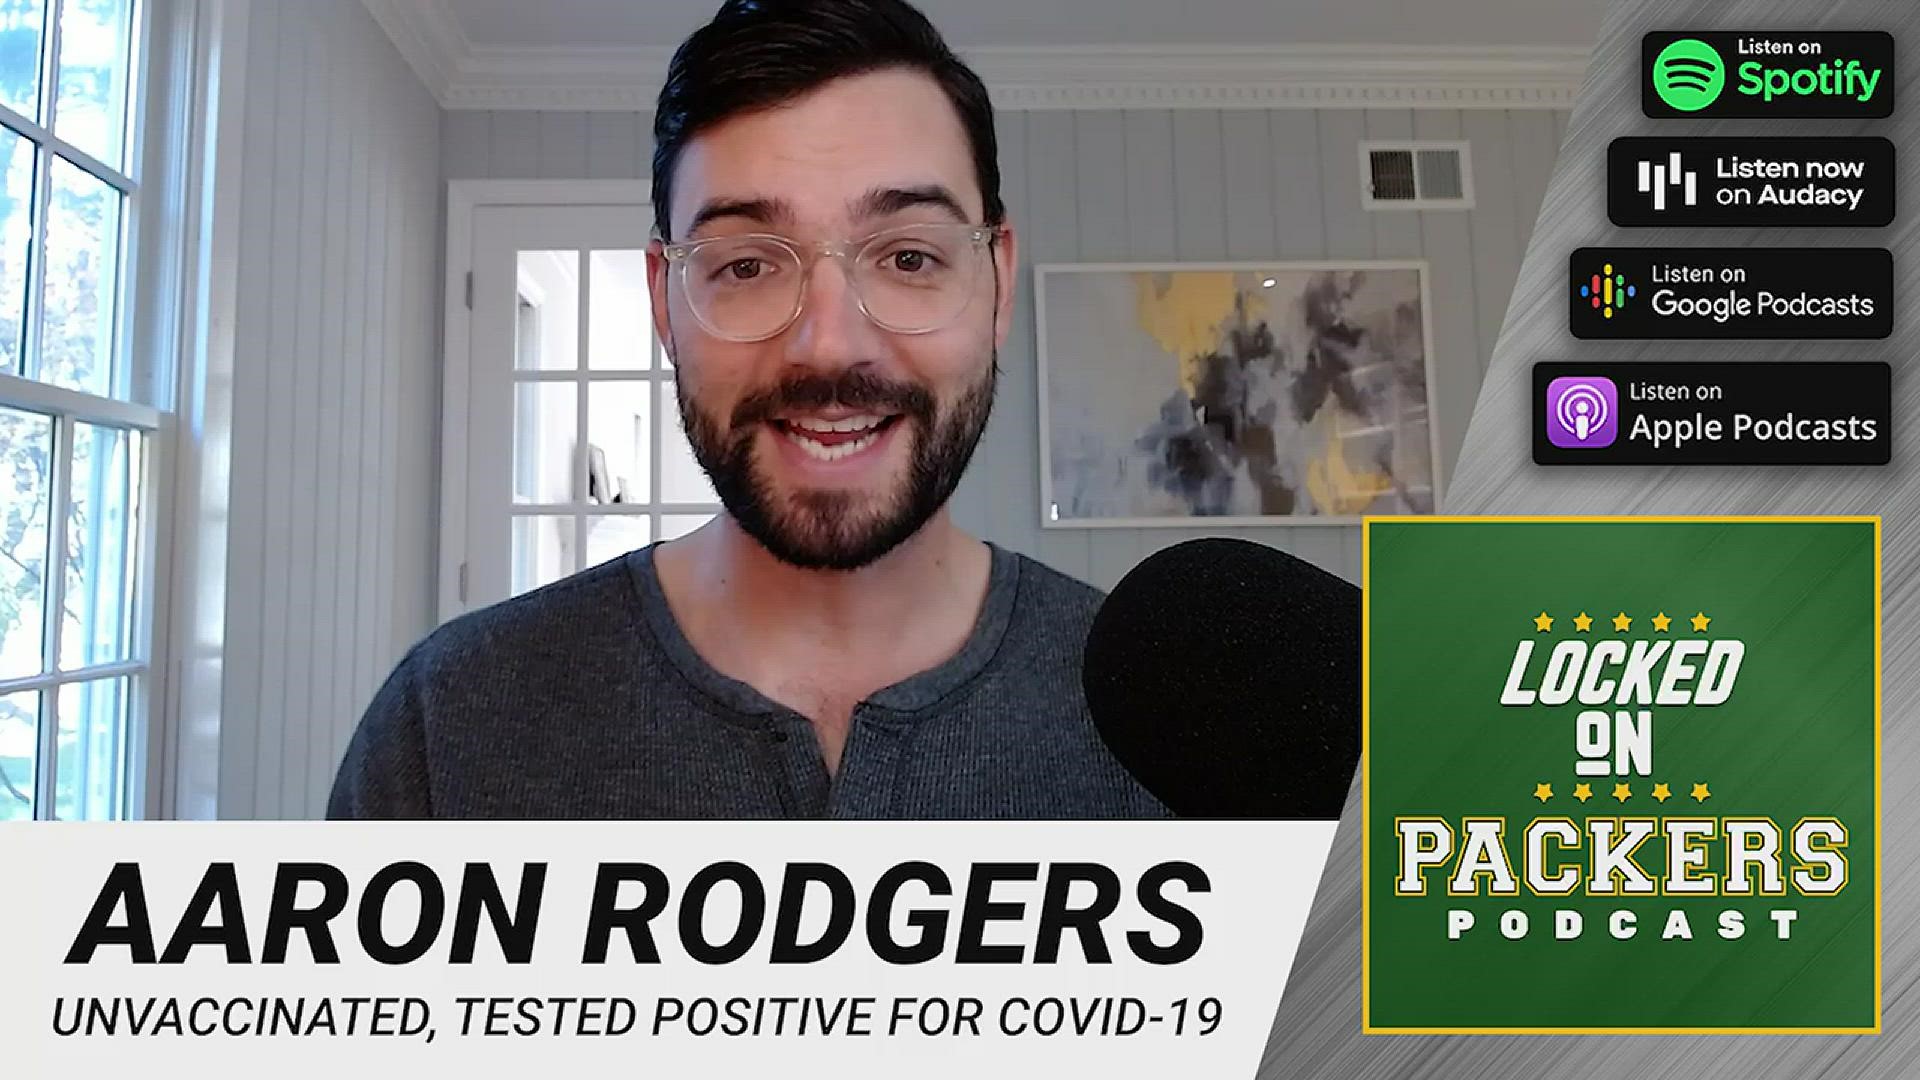 NFL Network reports that Rodgers is unvaccinated against COVID-19, forcing him to miss Sunday's game. The quarterback told reporters this summer he was 'immunized.'